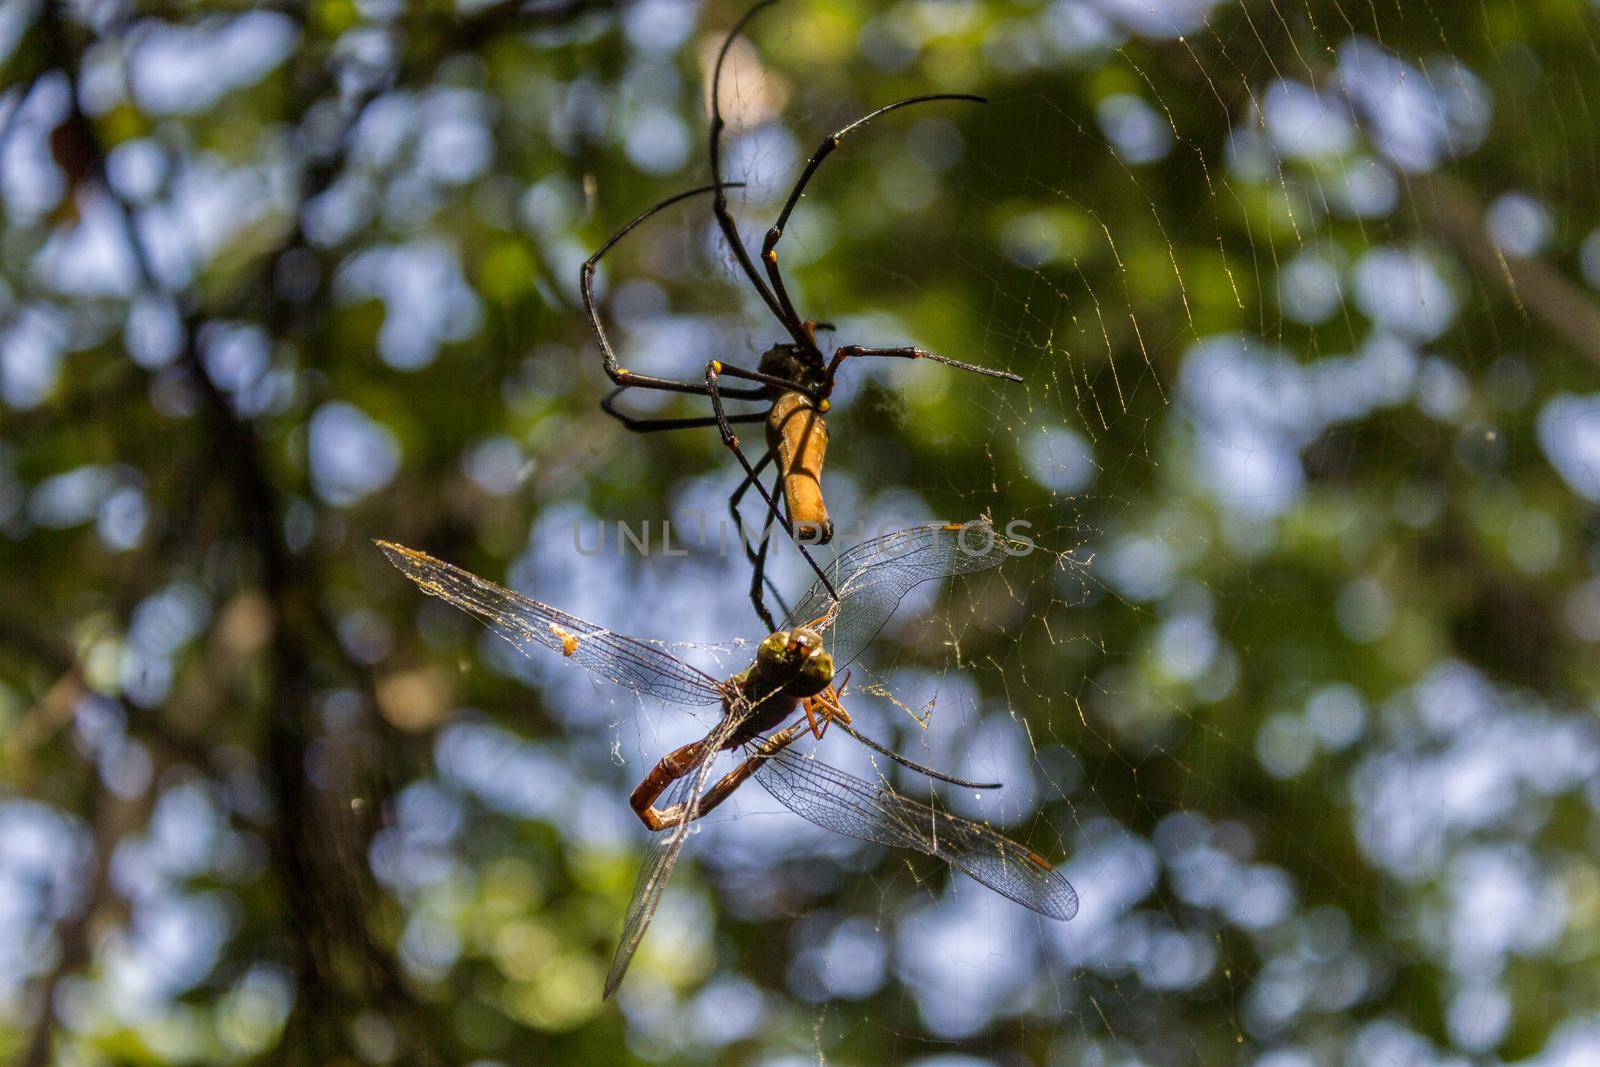 A large northern golden orb weaver or giant golden orb weaver spider is eating his prey. Nephila pilipes typically found in Asia and Australia, kakadu national park by bettercallcurry